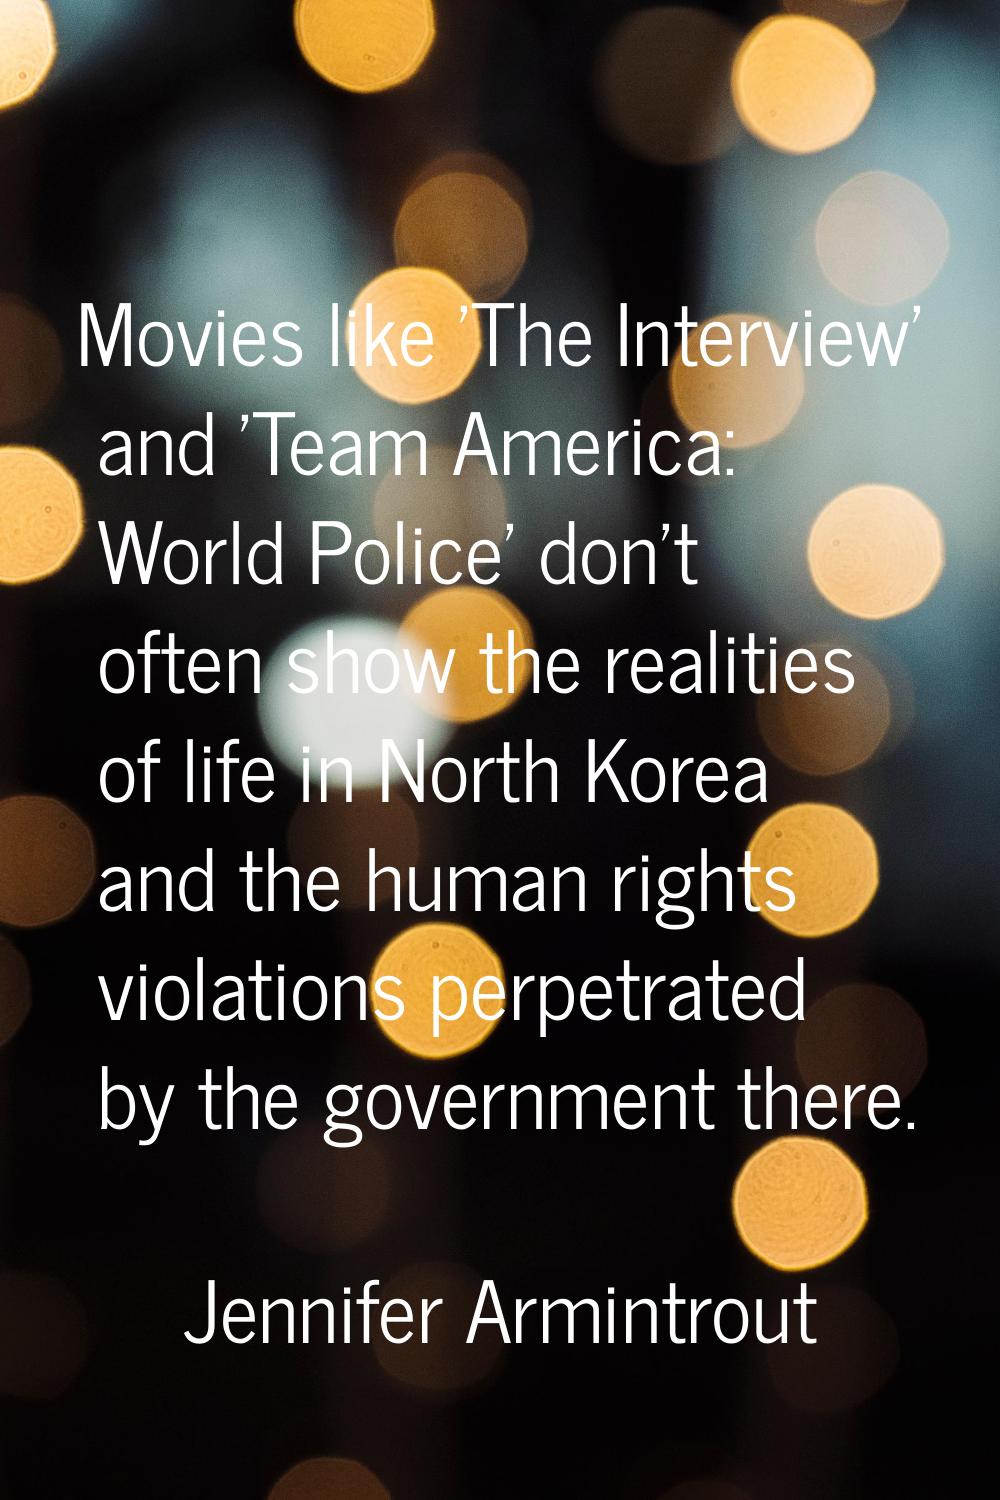 Movies like 'The Interview' and 'Team America: World Police' don't often show the realities of life